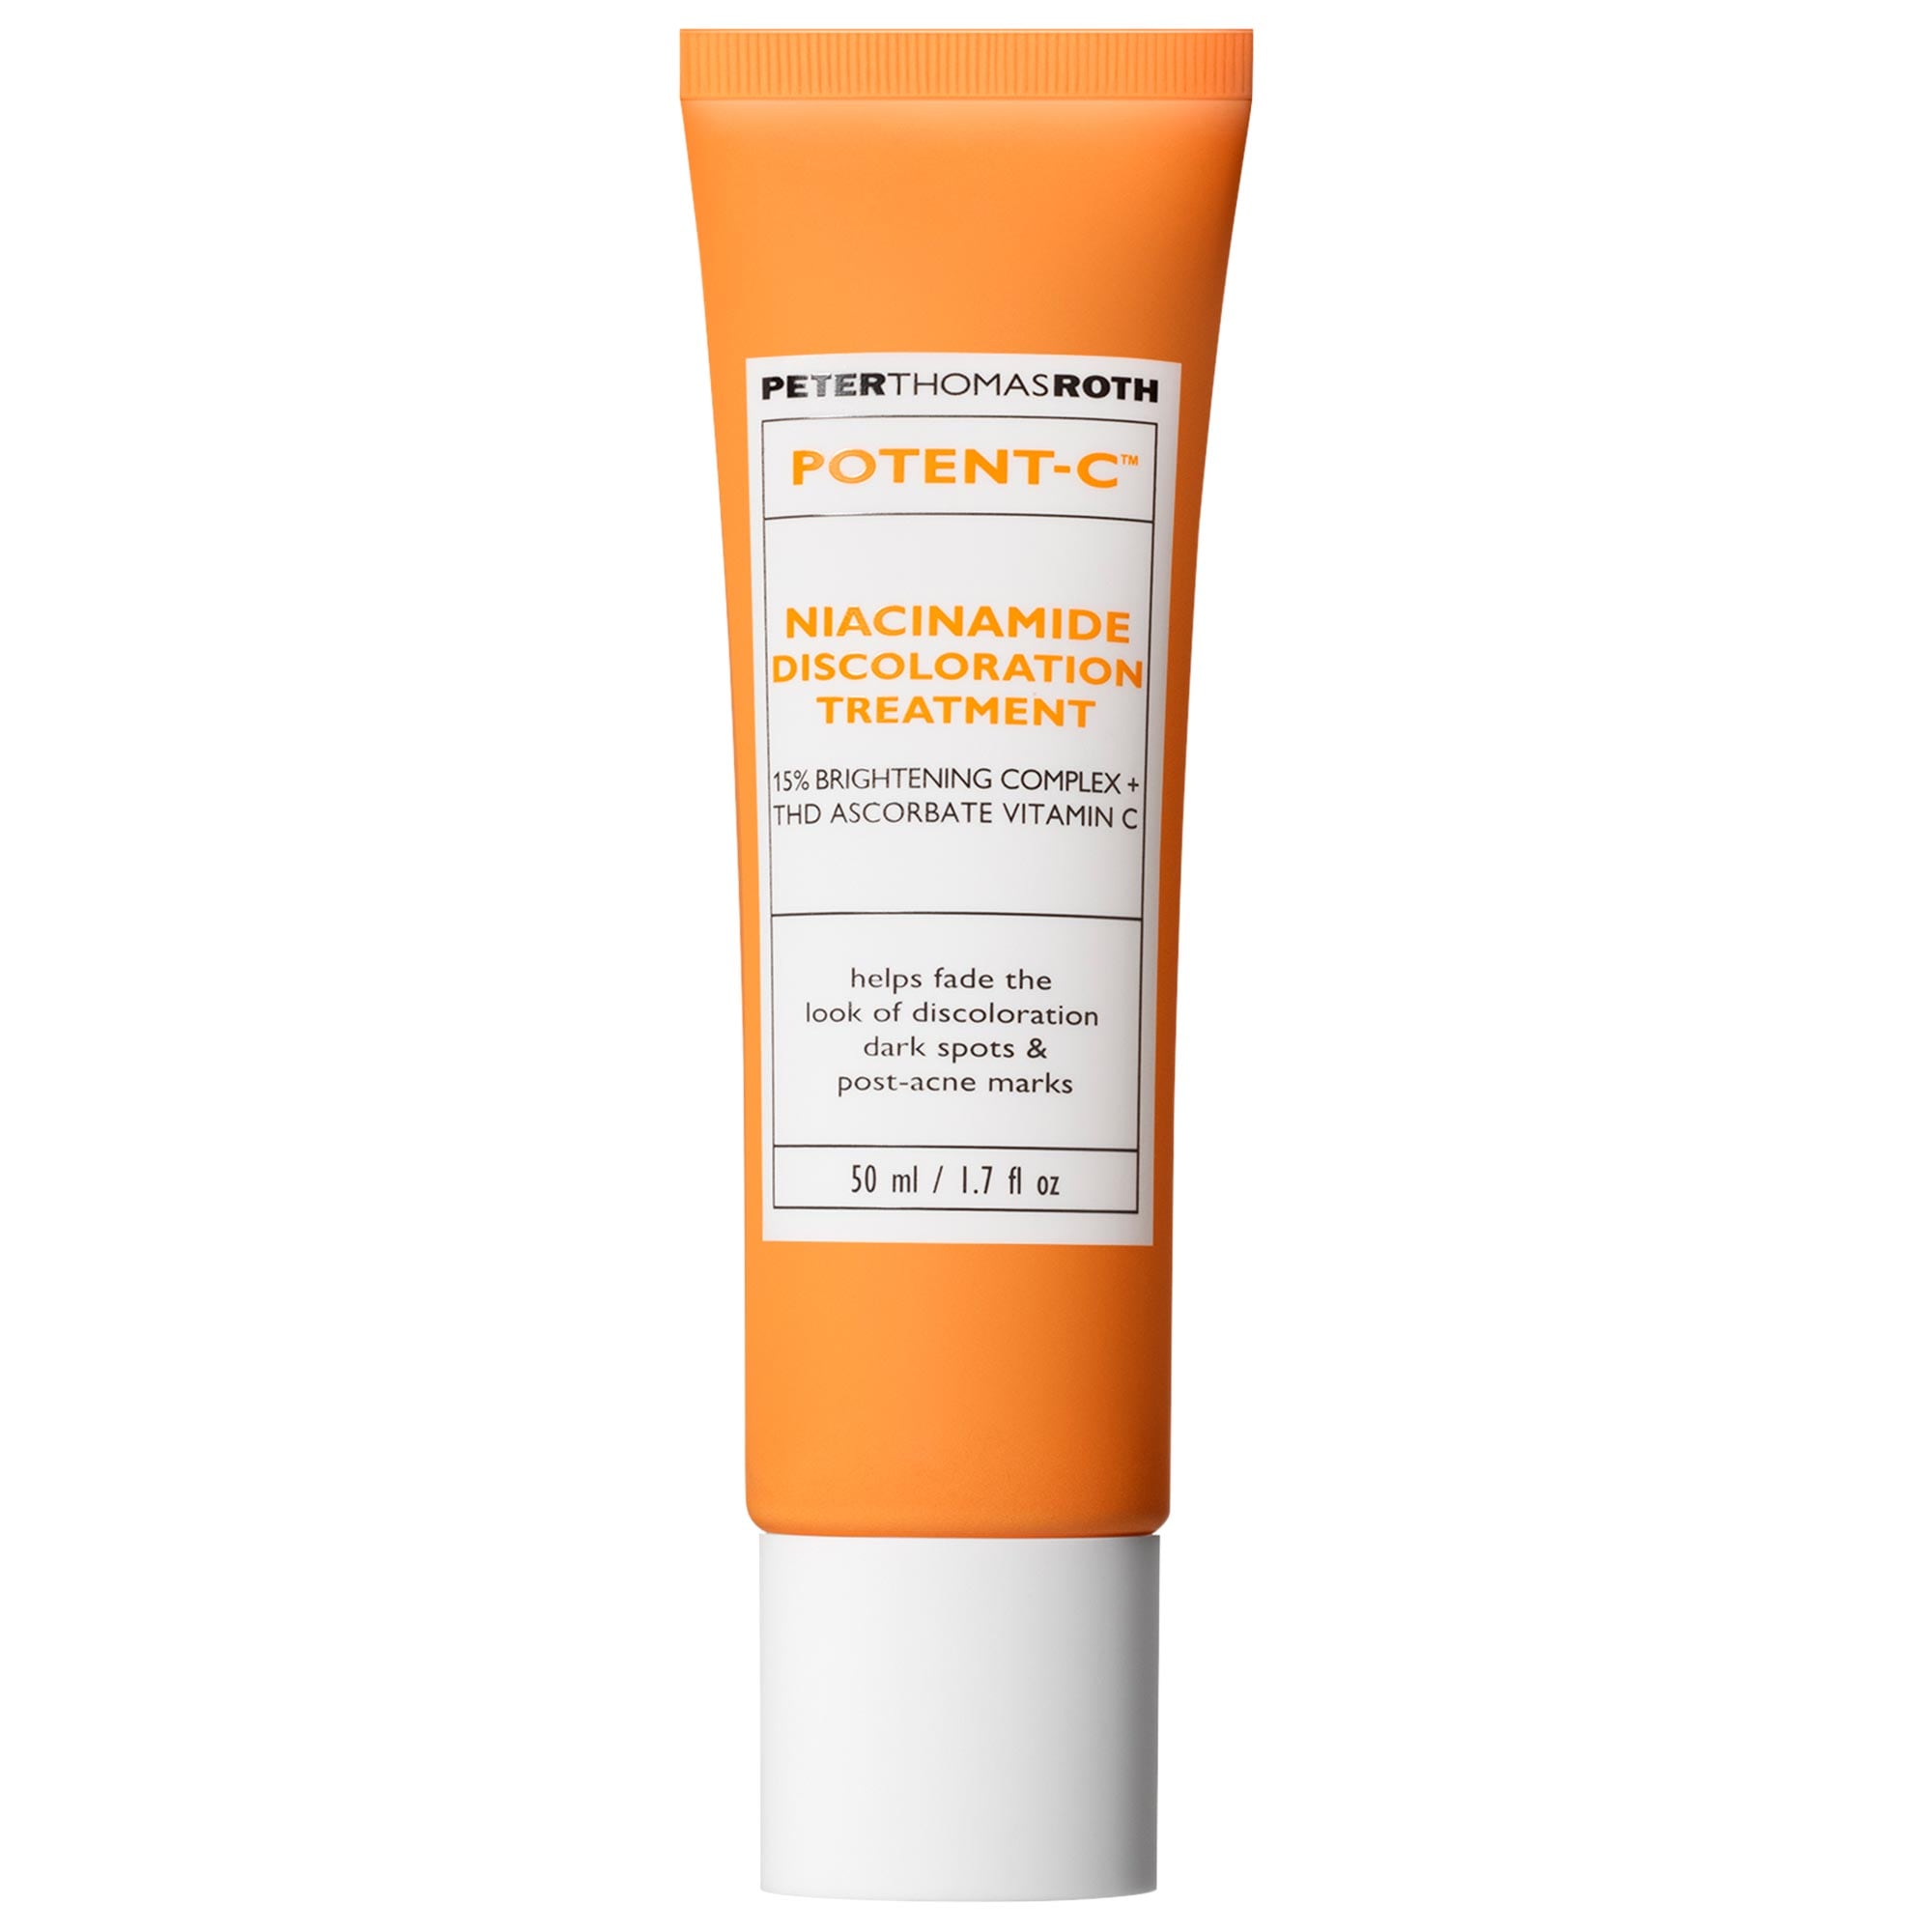 Potent-C™ Niacinamide Discoloration Treatment Peter Thomas Roth